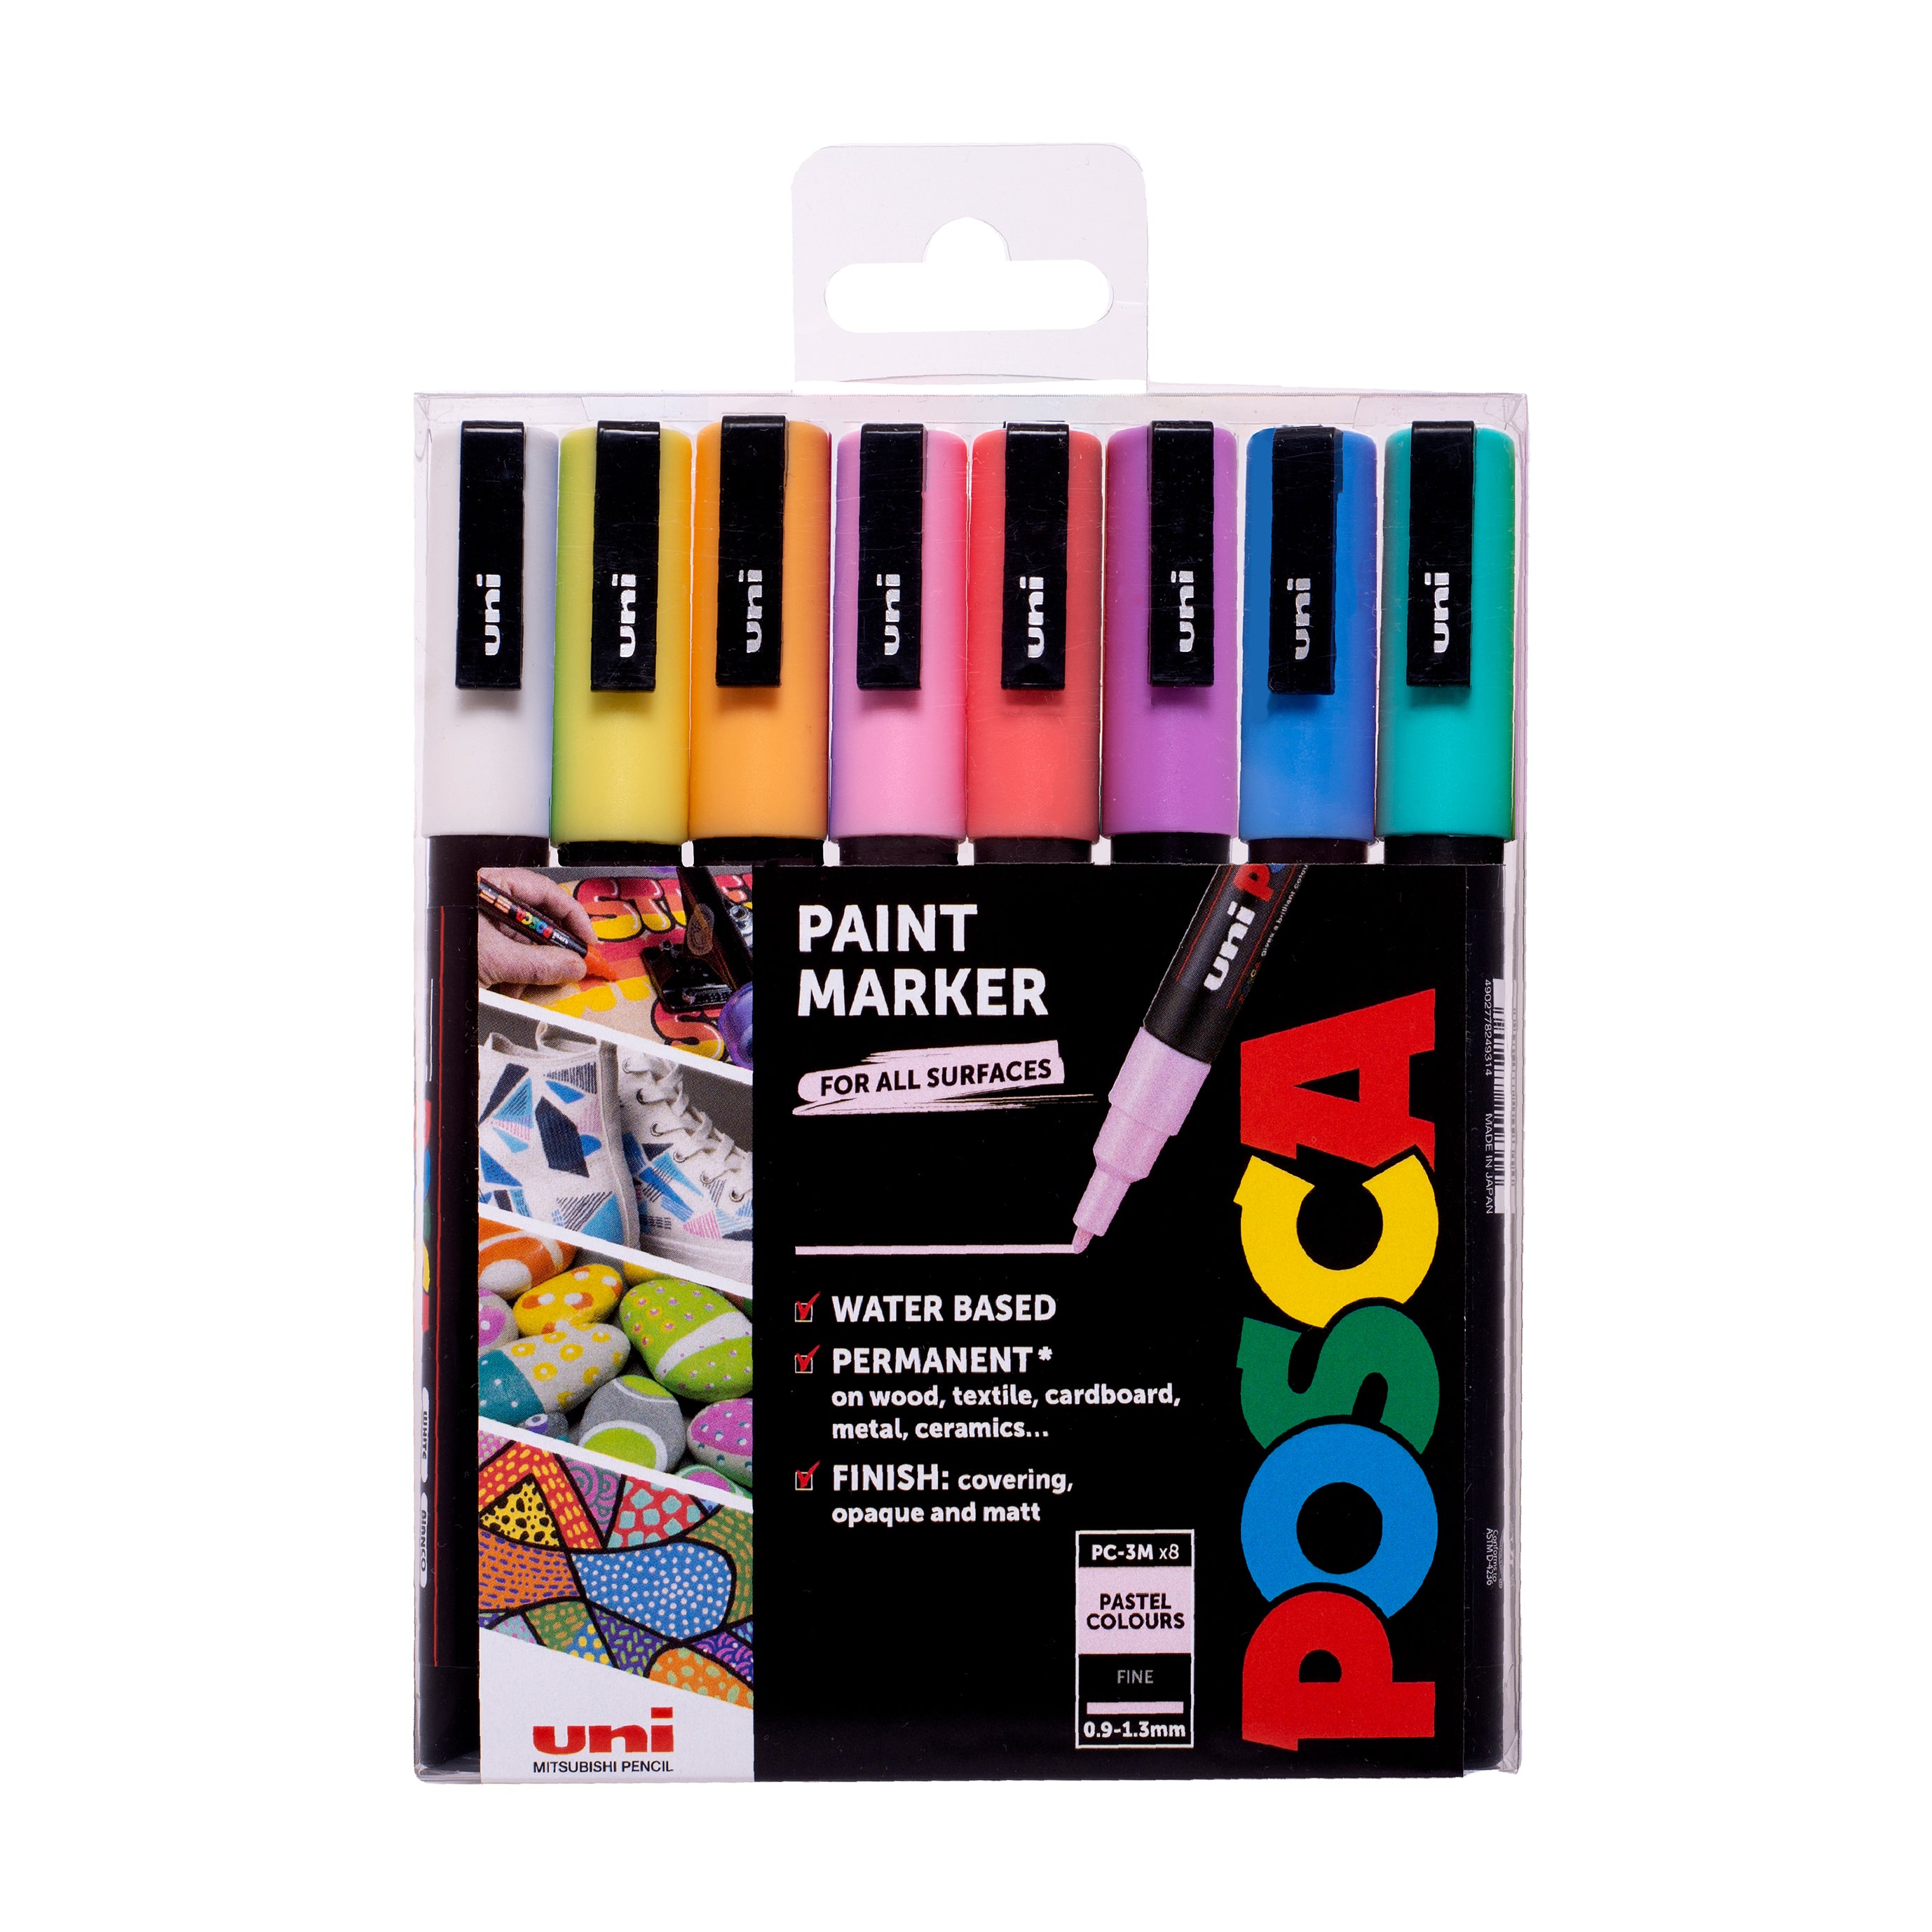 POSCA Medium Bullet tipped Marker Pens Assorted Pastel Colours Pack of 8 pens PC 3M